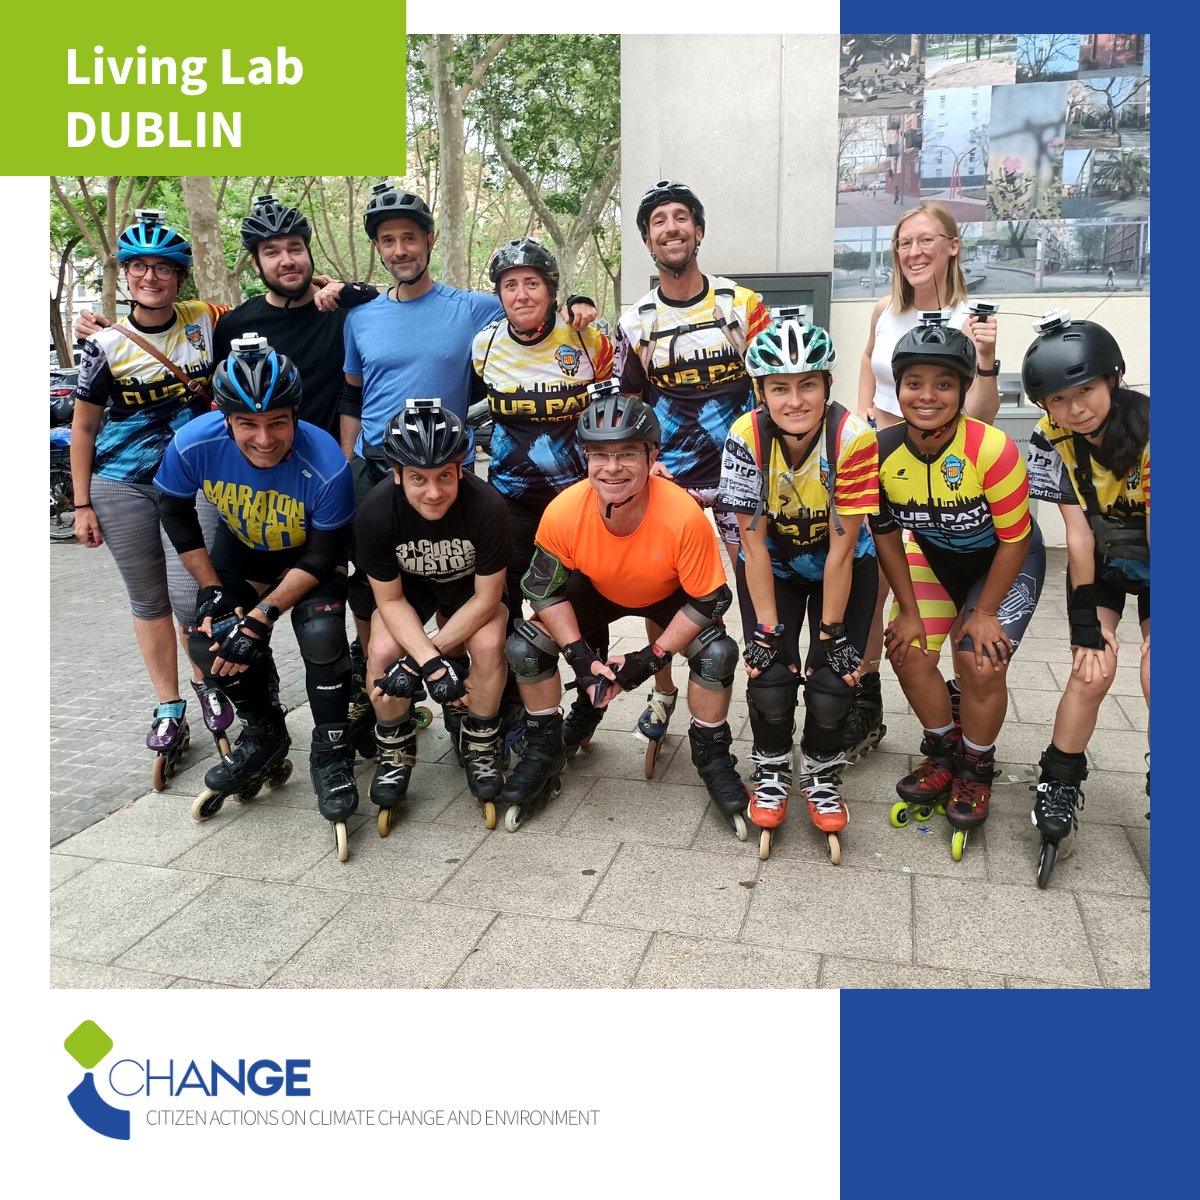 🌱 At the #EUGreenWeek, @GAMA_UB organized a #CitizenScience activity in the #Barcelona #LivingLab on #ExtremeEvents. It involved collecting #MeteorologicalData with #MeteoTracker devices while rollerblading in the city. 
▶️ ow.ly/jORJ50OWSzM
@EUgreenweek @EUgreenresearch